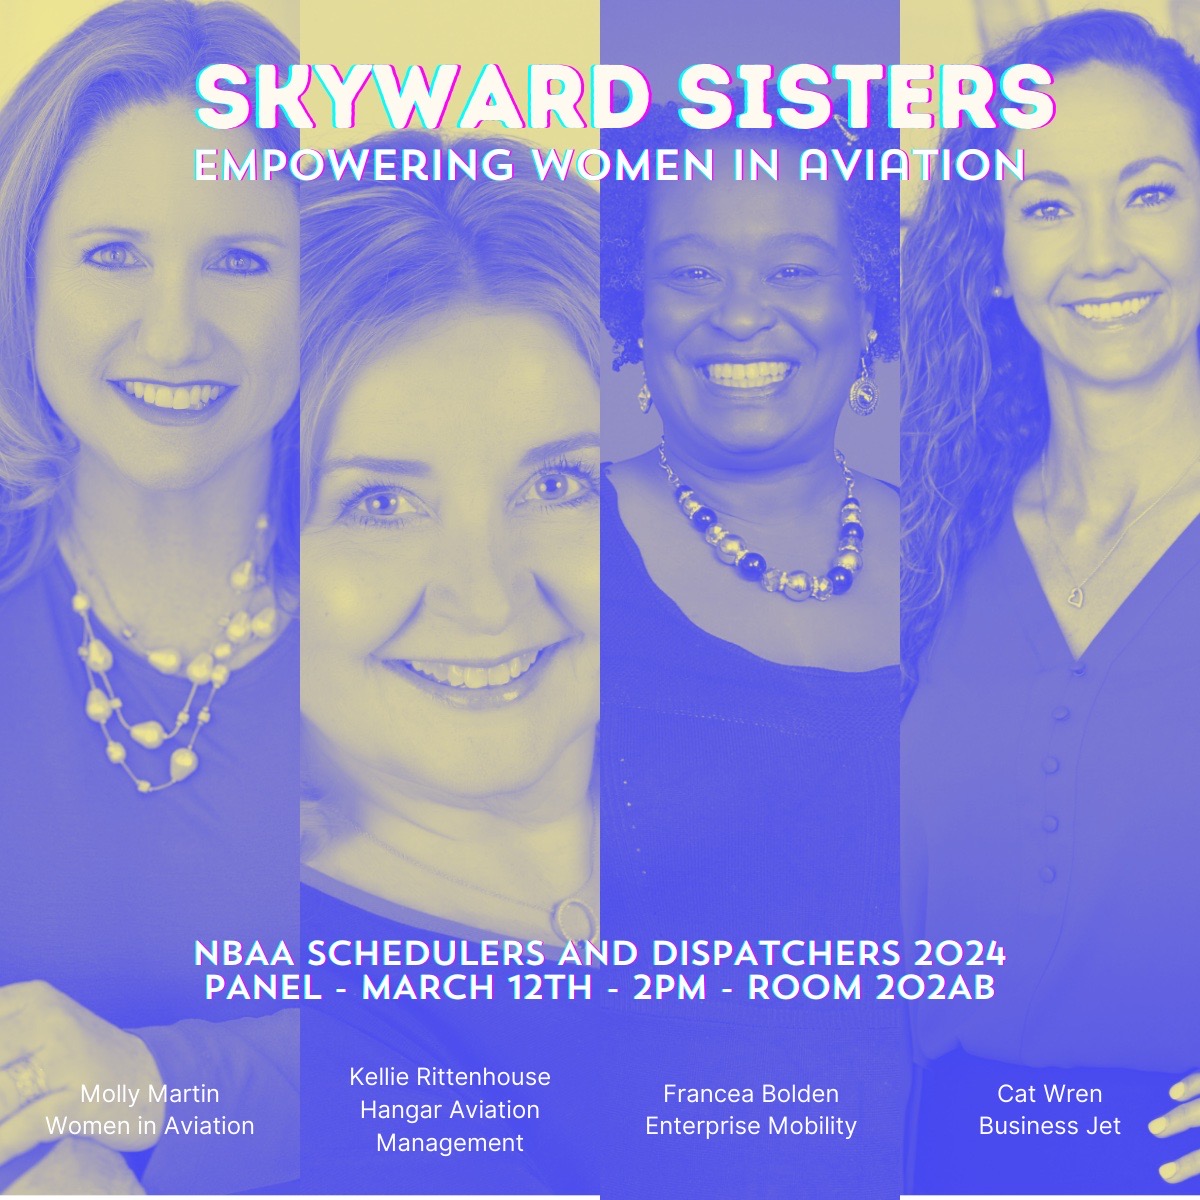 #WomeninAviationInternational's Manager of Chapter Relations, Jessi Litz-Rowden, is the vice chairwoman of NBAA's S&D Committee. Molly Martin, WAI Director of Member Engagement, will also be in attendance at #SDC2024. Jessi and Molly will both be speaking at #SDC2024!